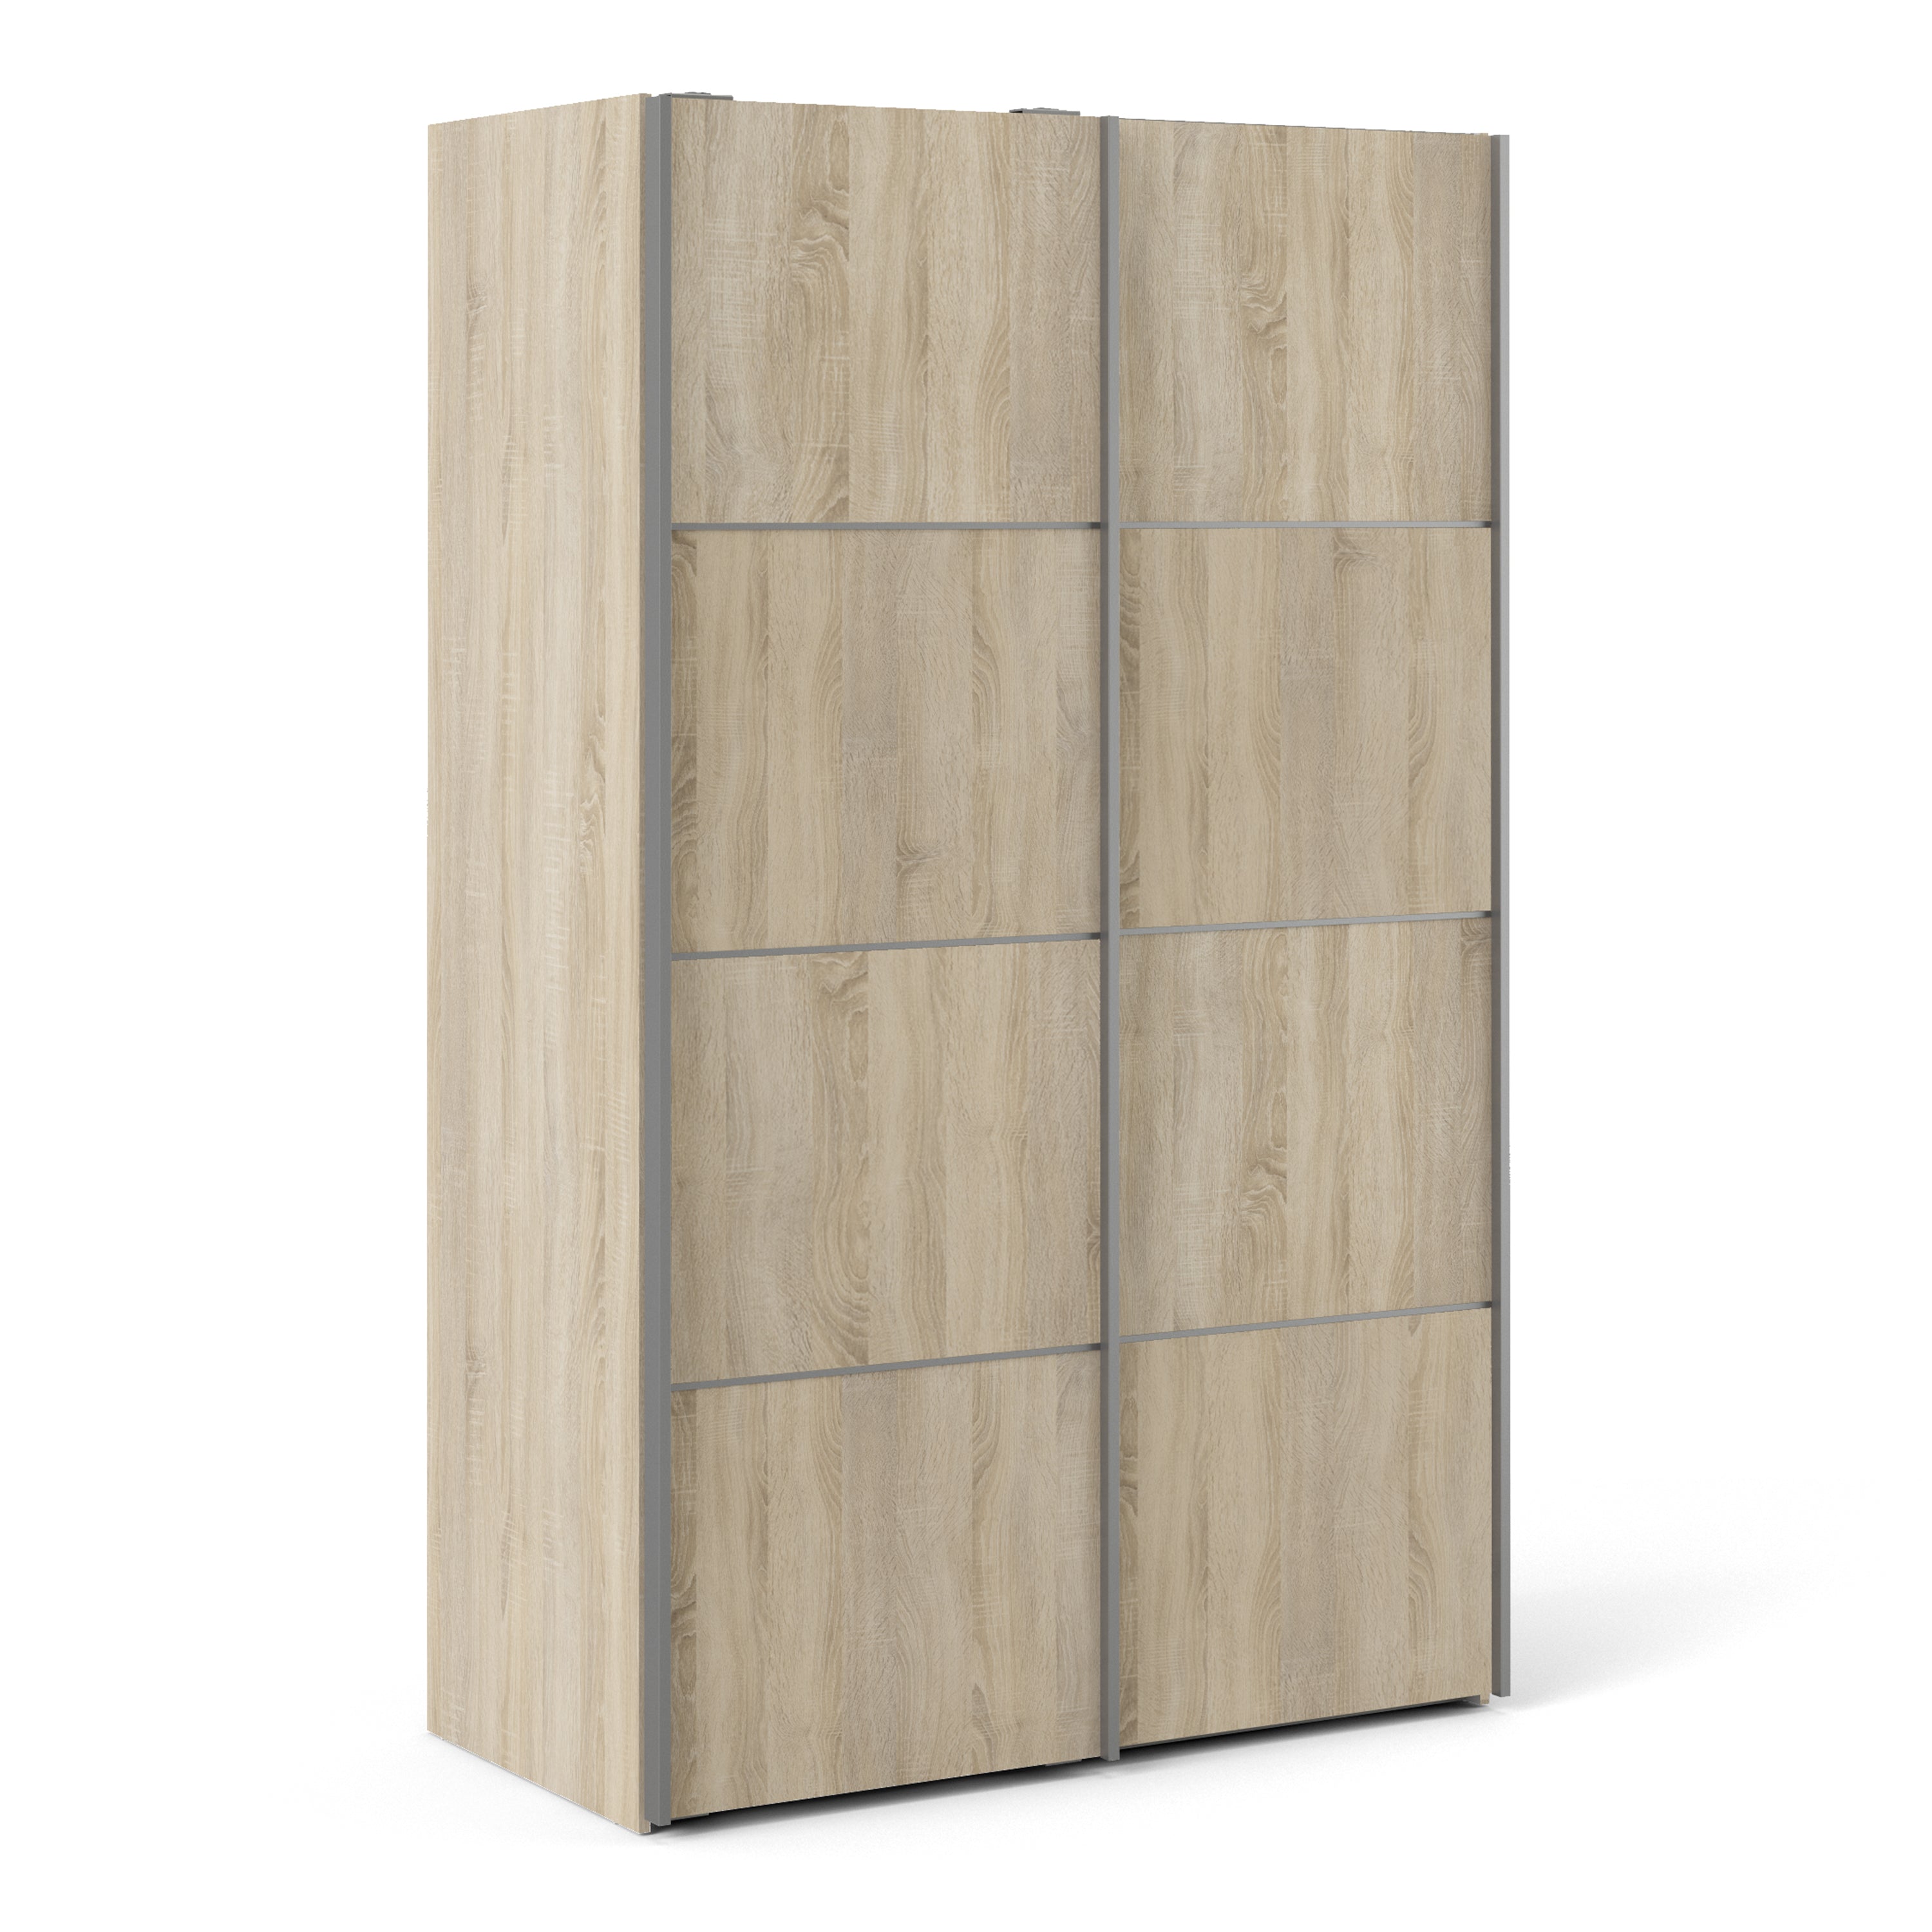 Image of Verona Sliding Wardrobe With 2 Shelves 120cm - Available In 6 Colours